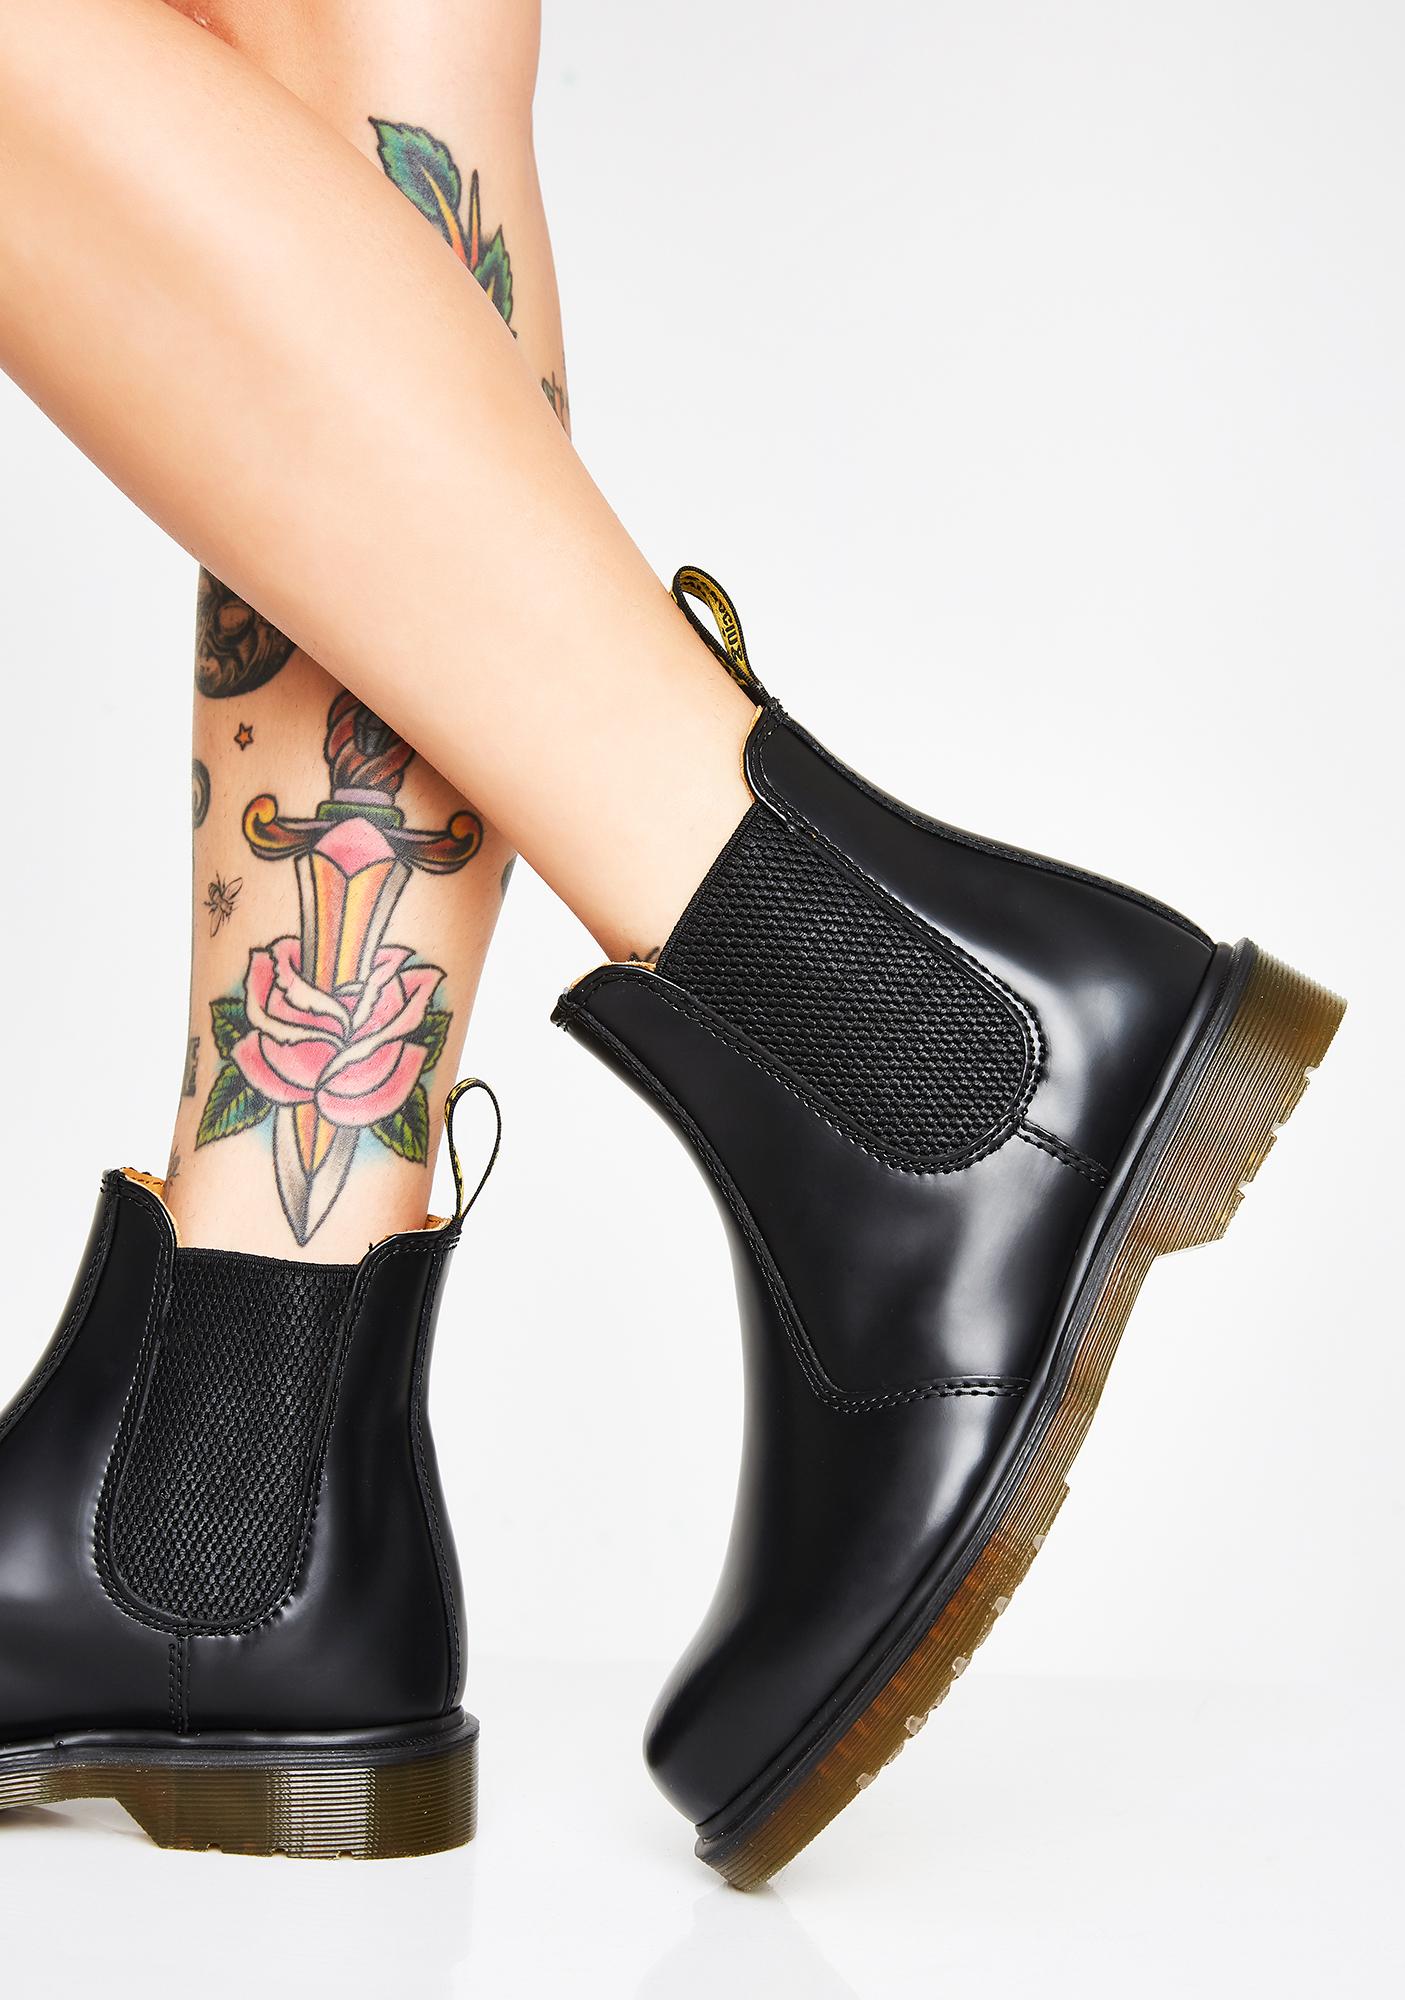 dr martens chelsea boots 2976 smooth